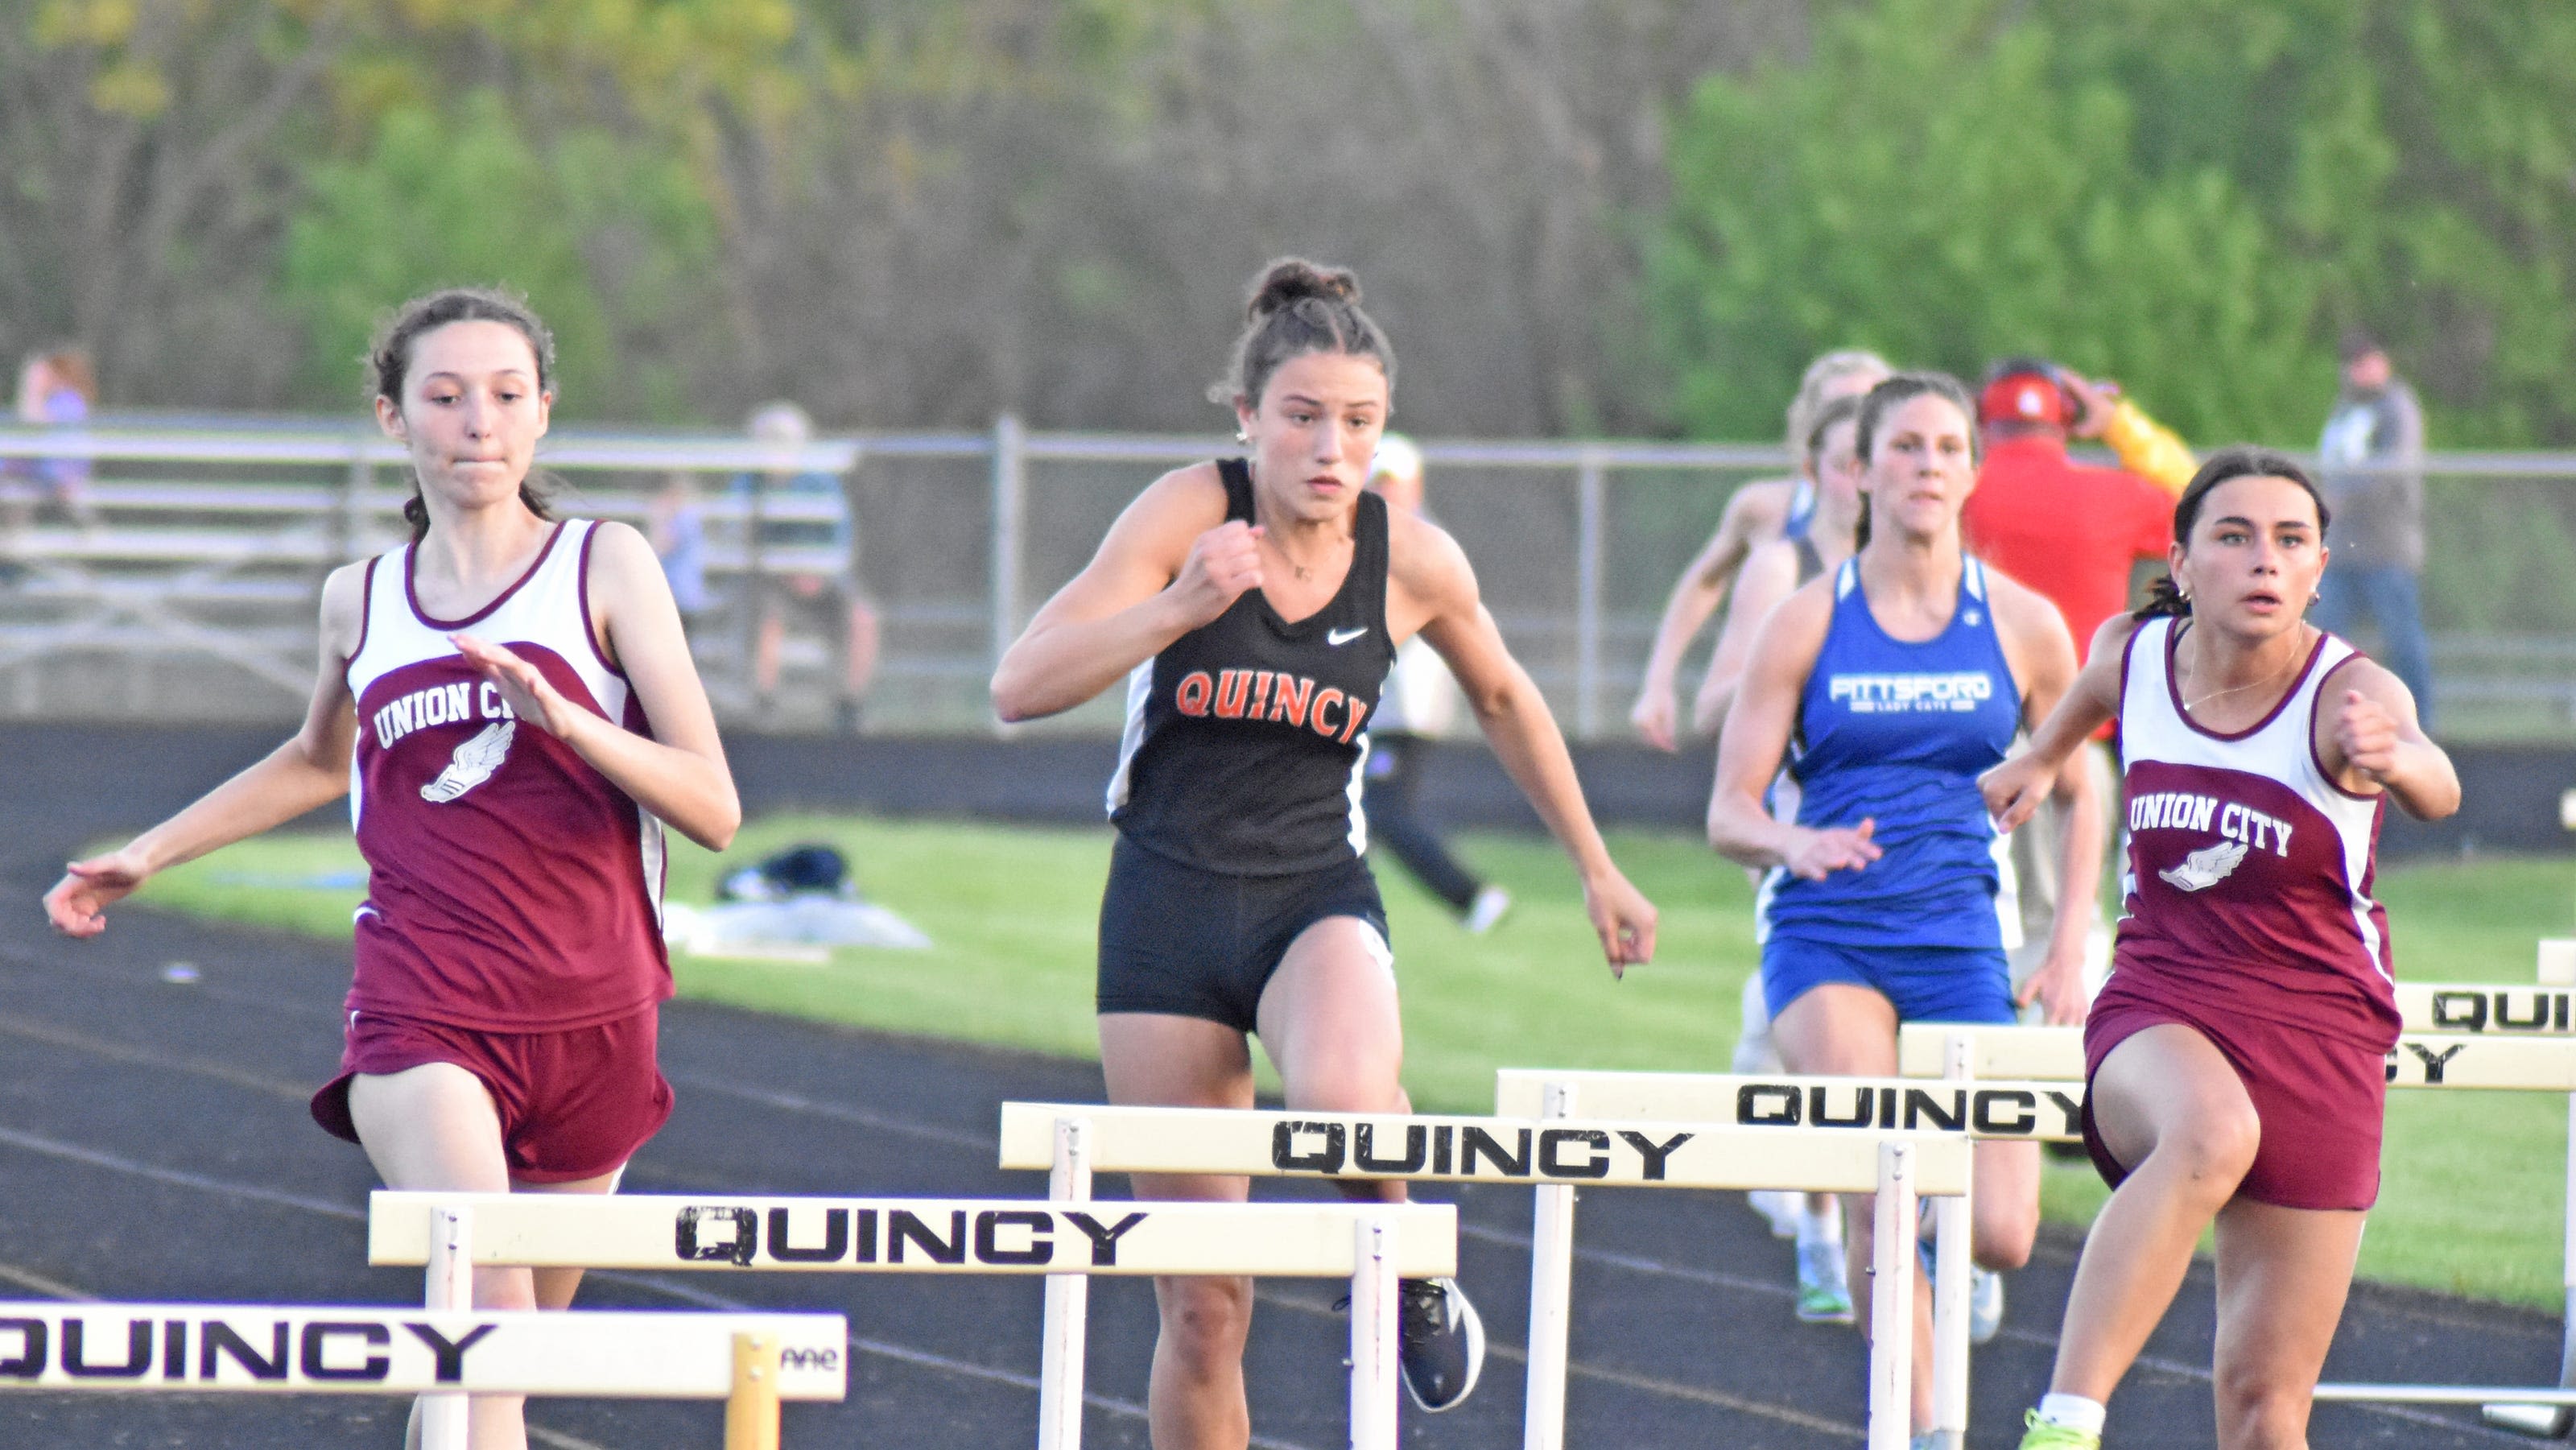 Branch County boasts 5 all-state honors in Division 3 track and field